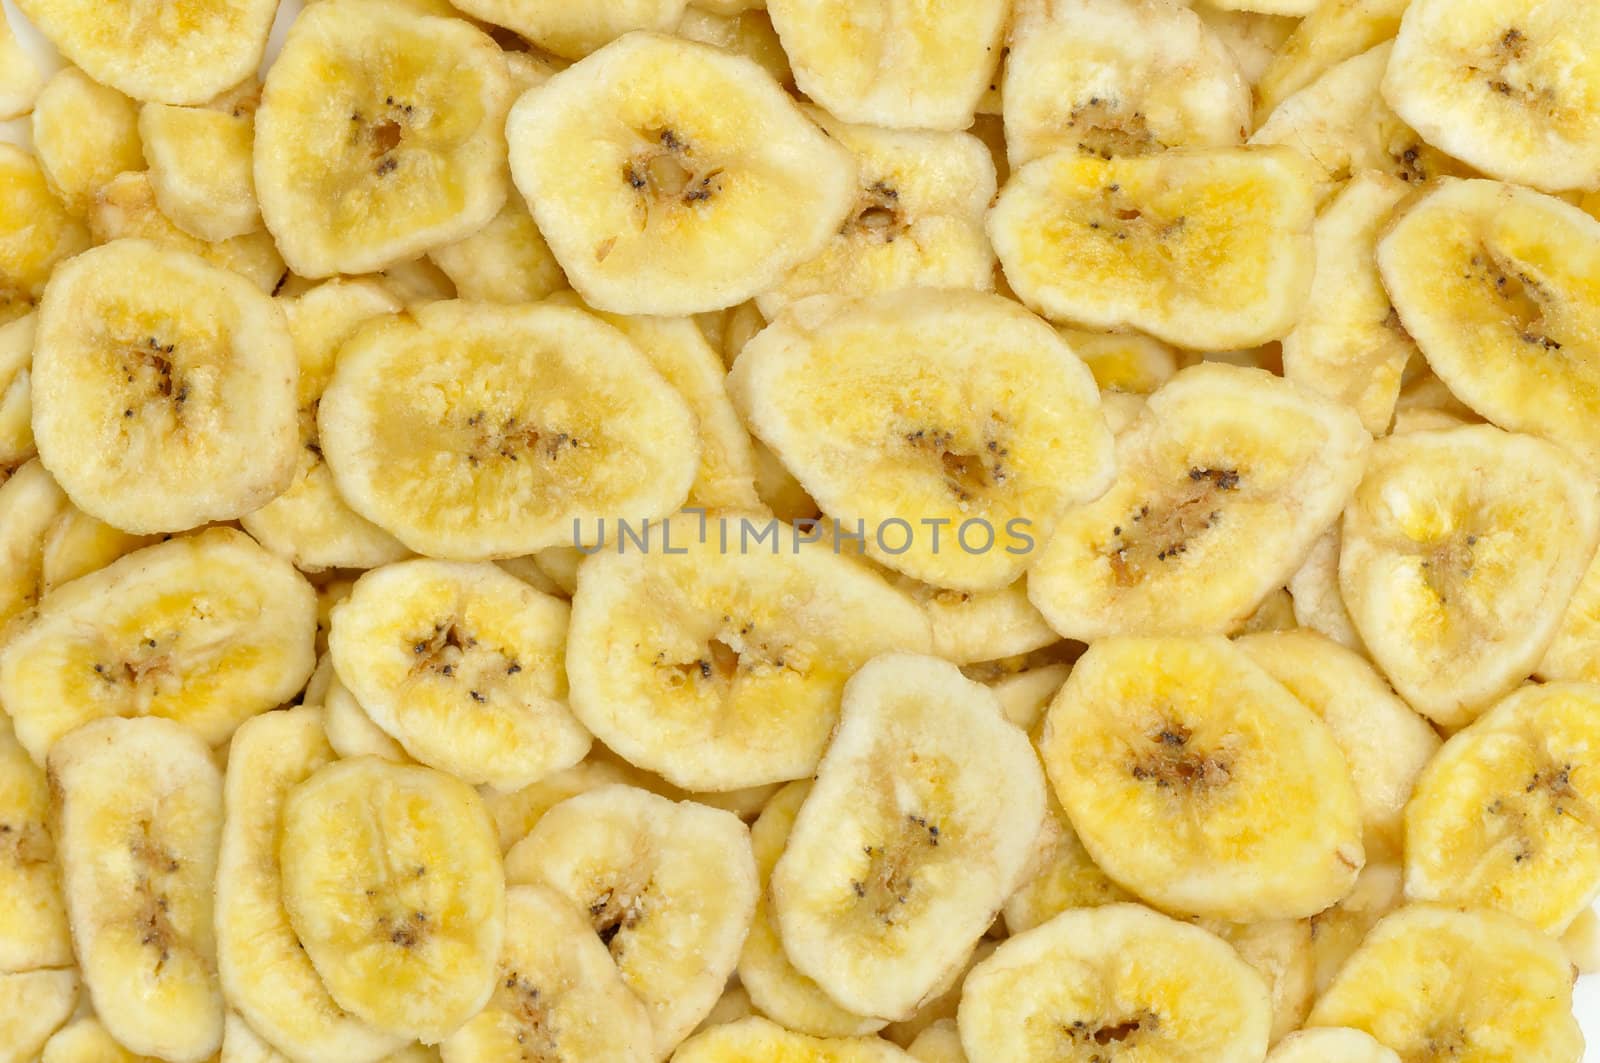 top view of dried banana slices in natural light